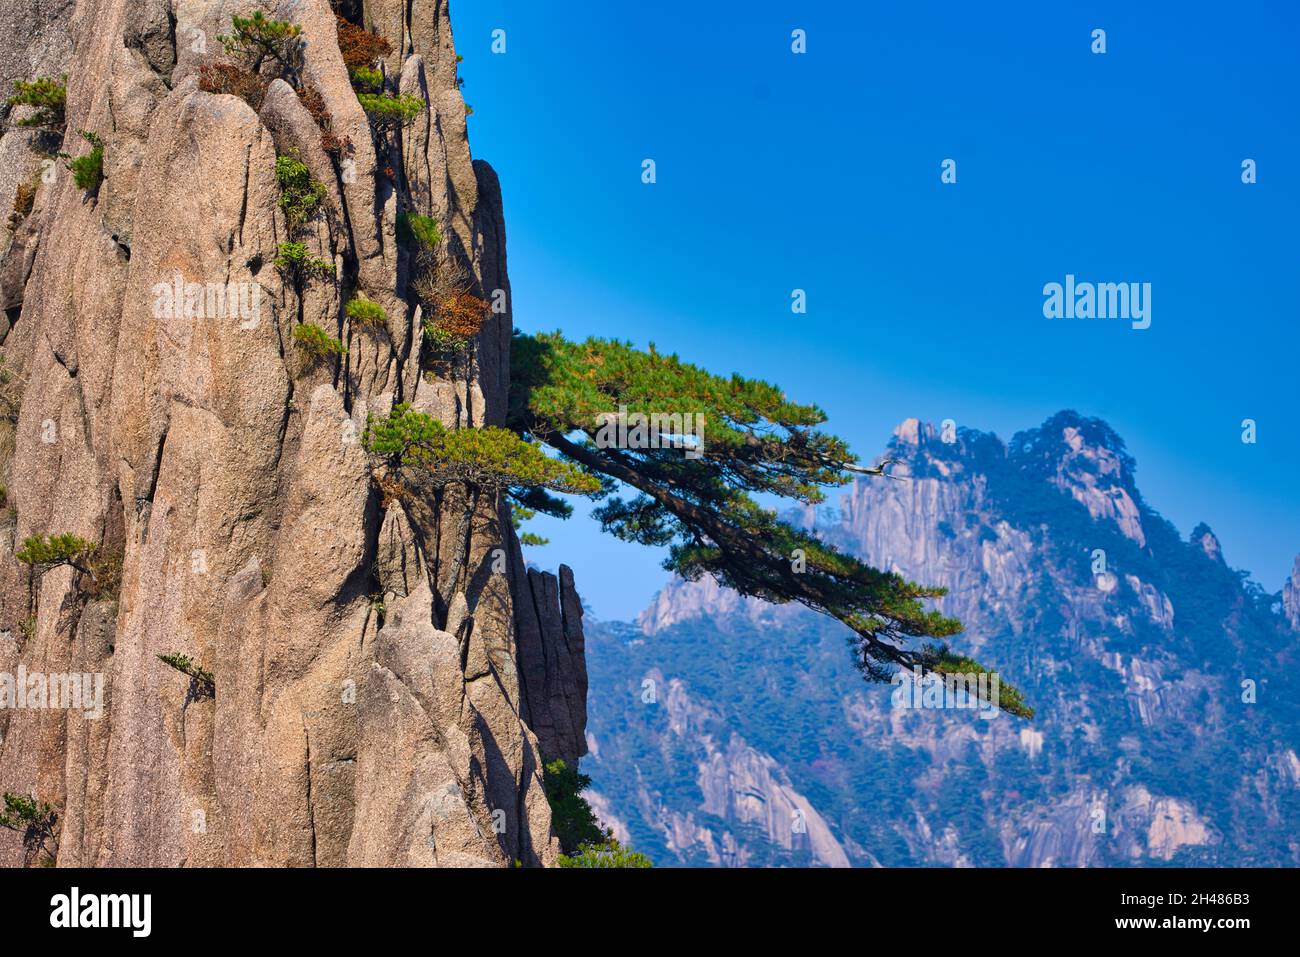 The pine trees growing horizontally along the cliff. Landscape of Mount Huangshan (Yellow Mountain). UNESCO World Heritage Site. Anhui Province, China Stock Photo